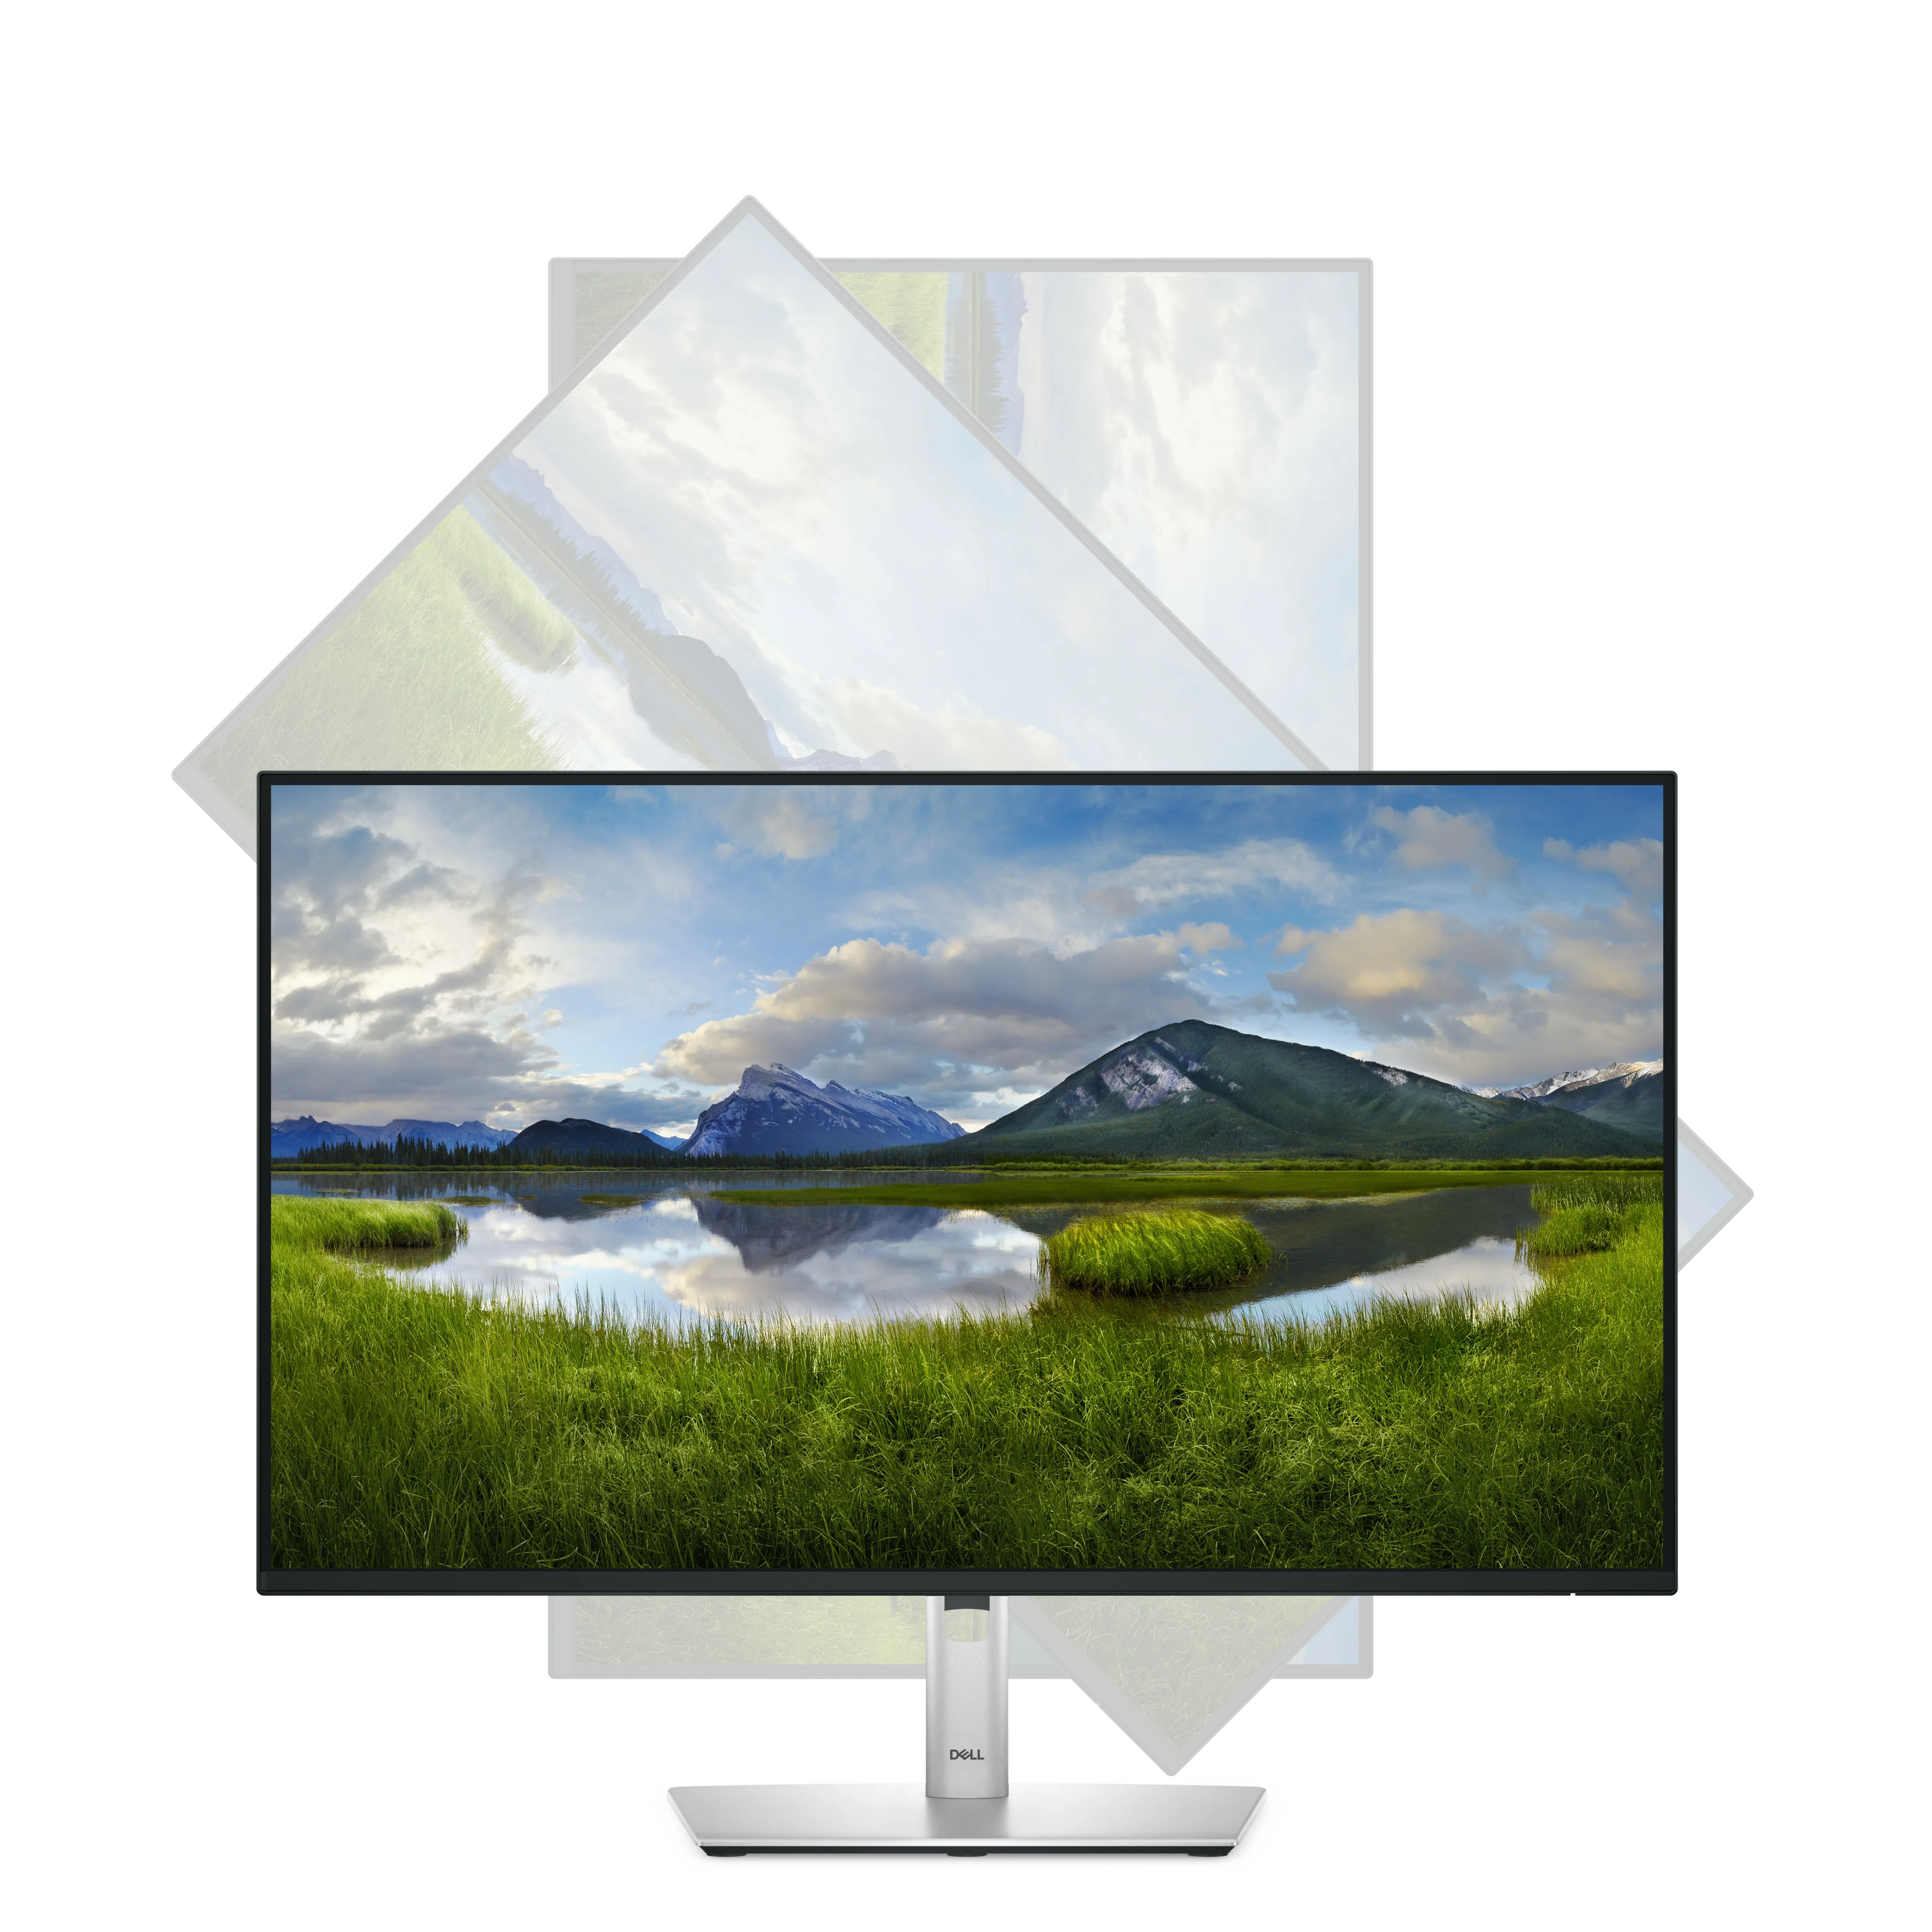 Dell P2725HE - 27" Zoll - 1920x1080